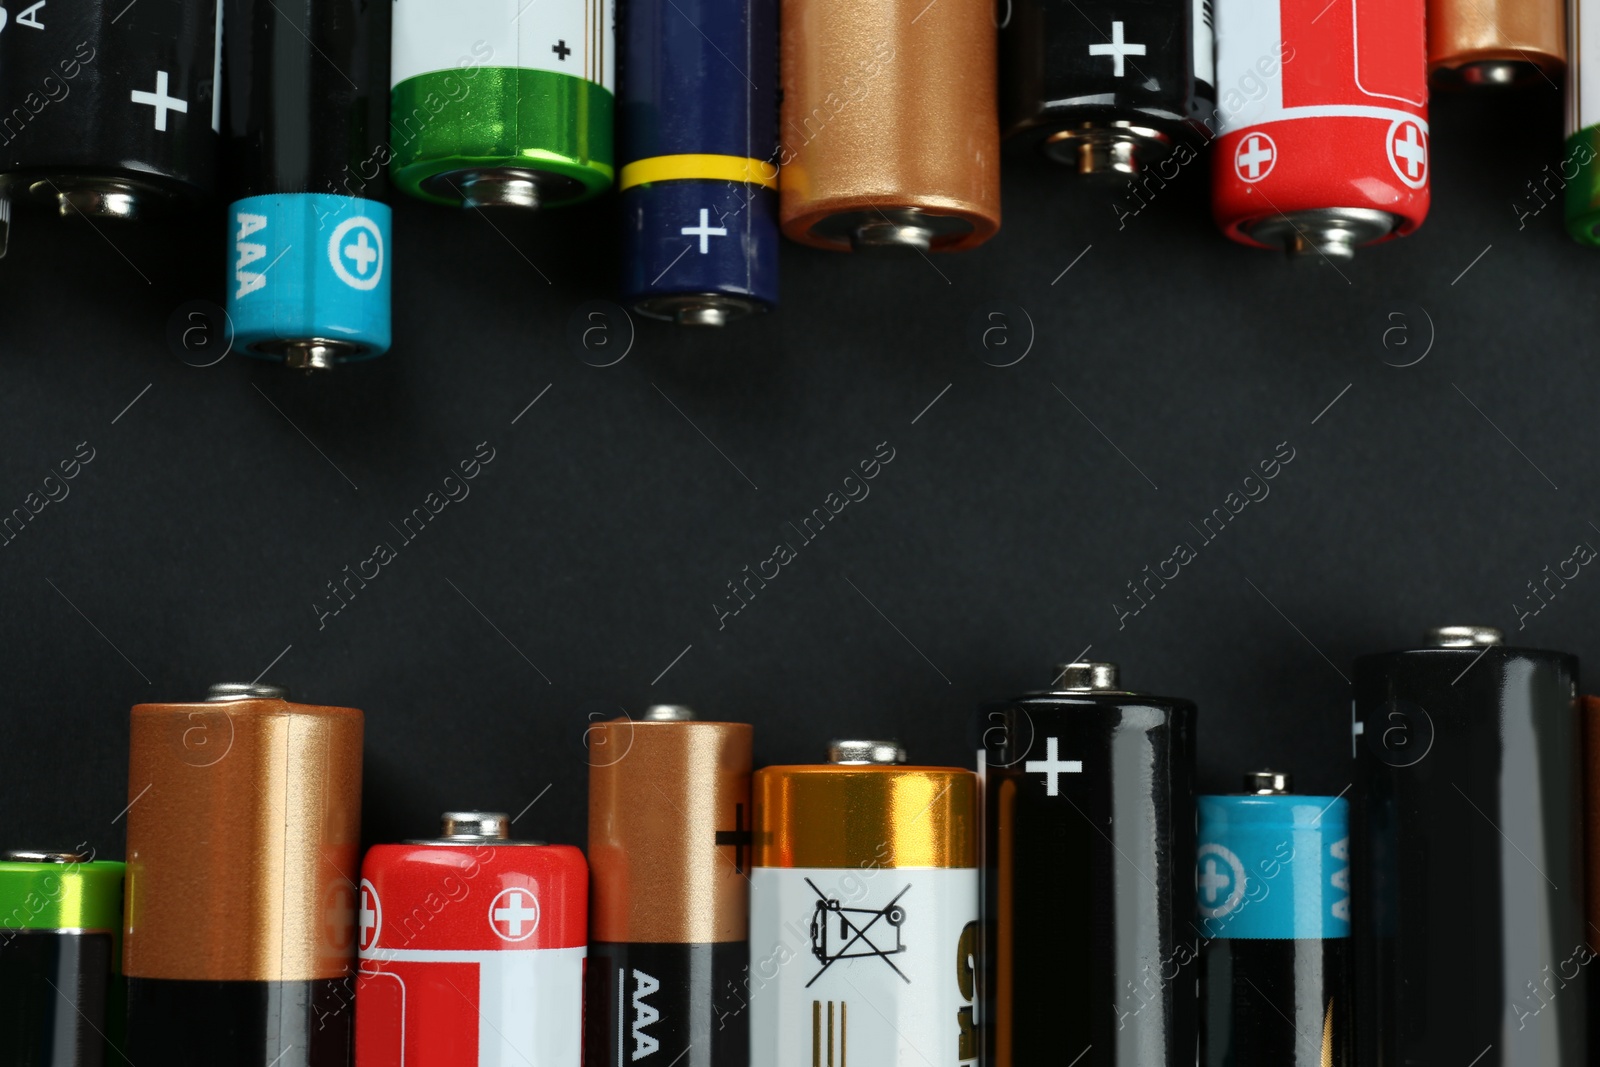 Image of Many different batteries on black background, flat lay